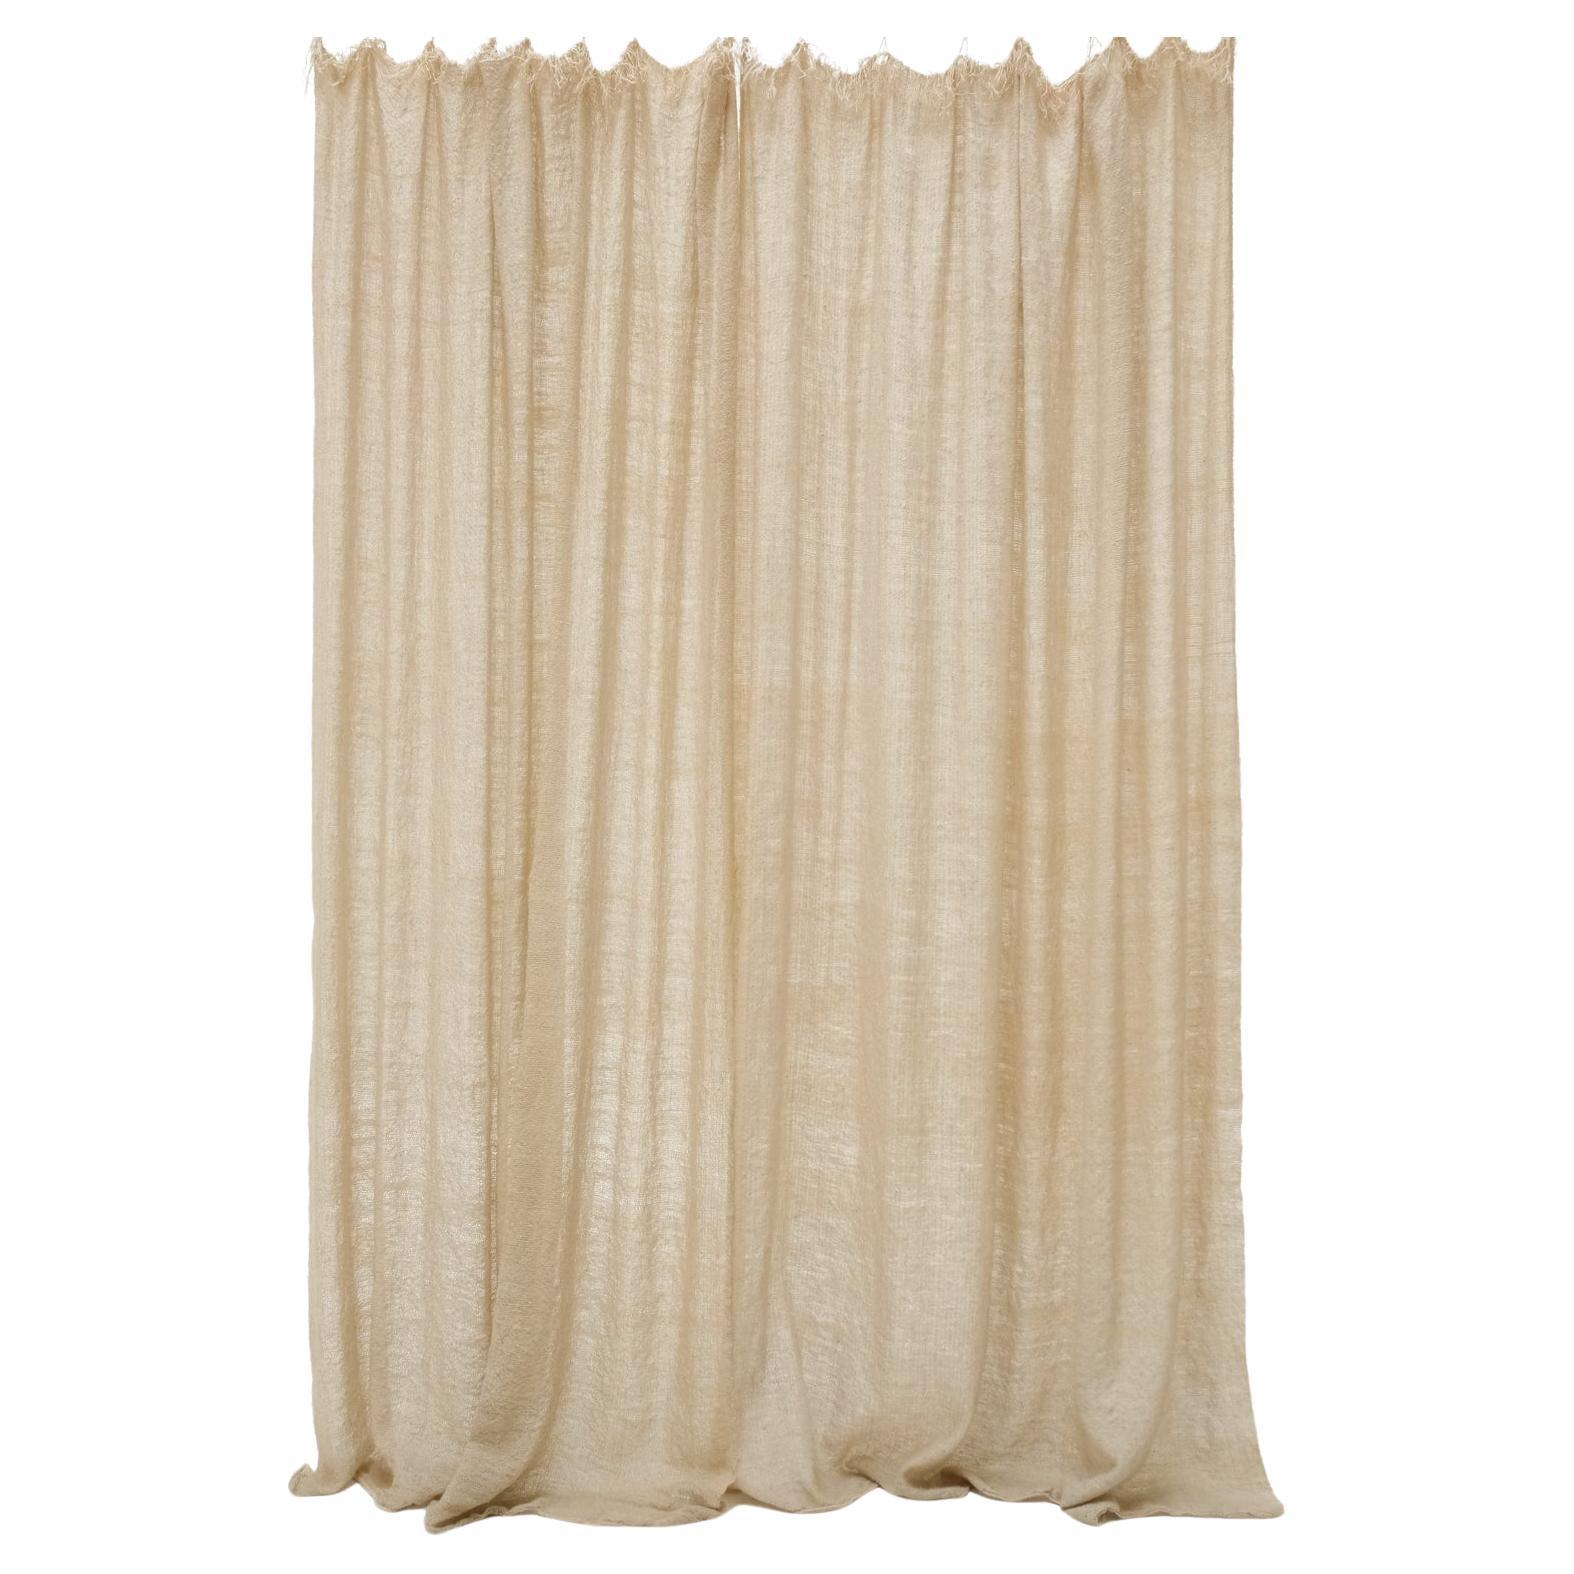 Curtains Made of handspun and handwoven local Wool